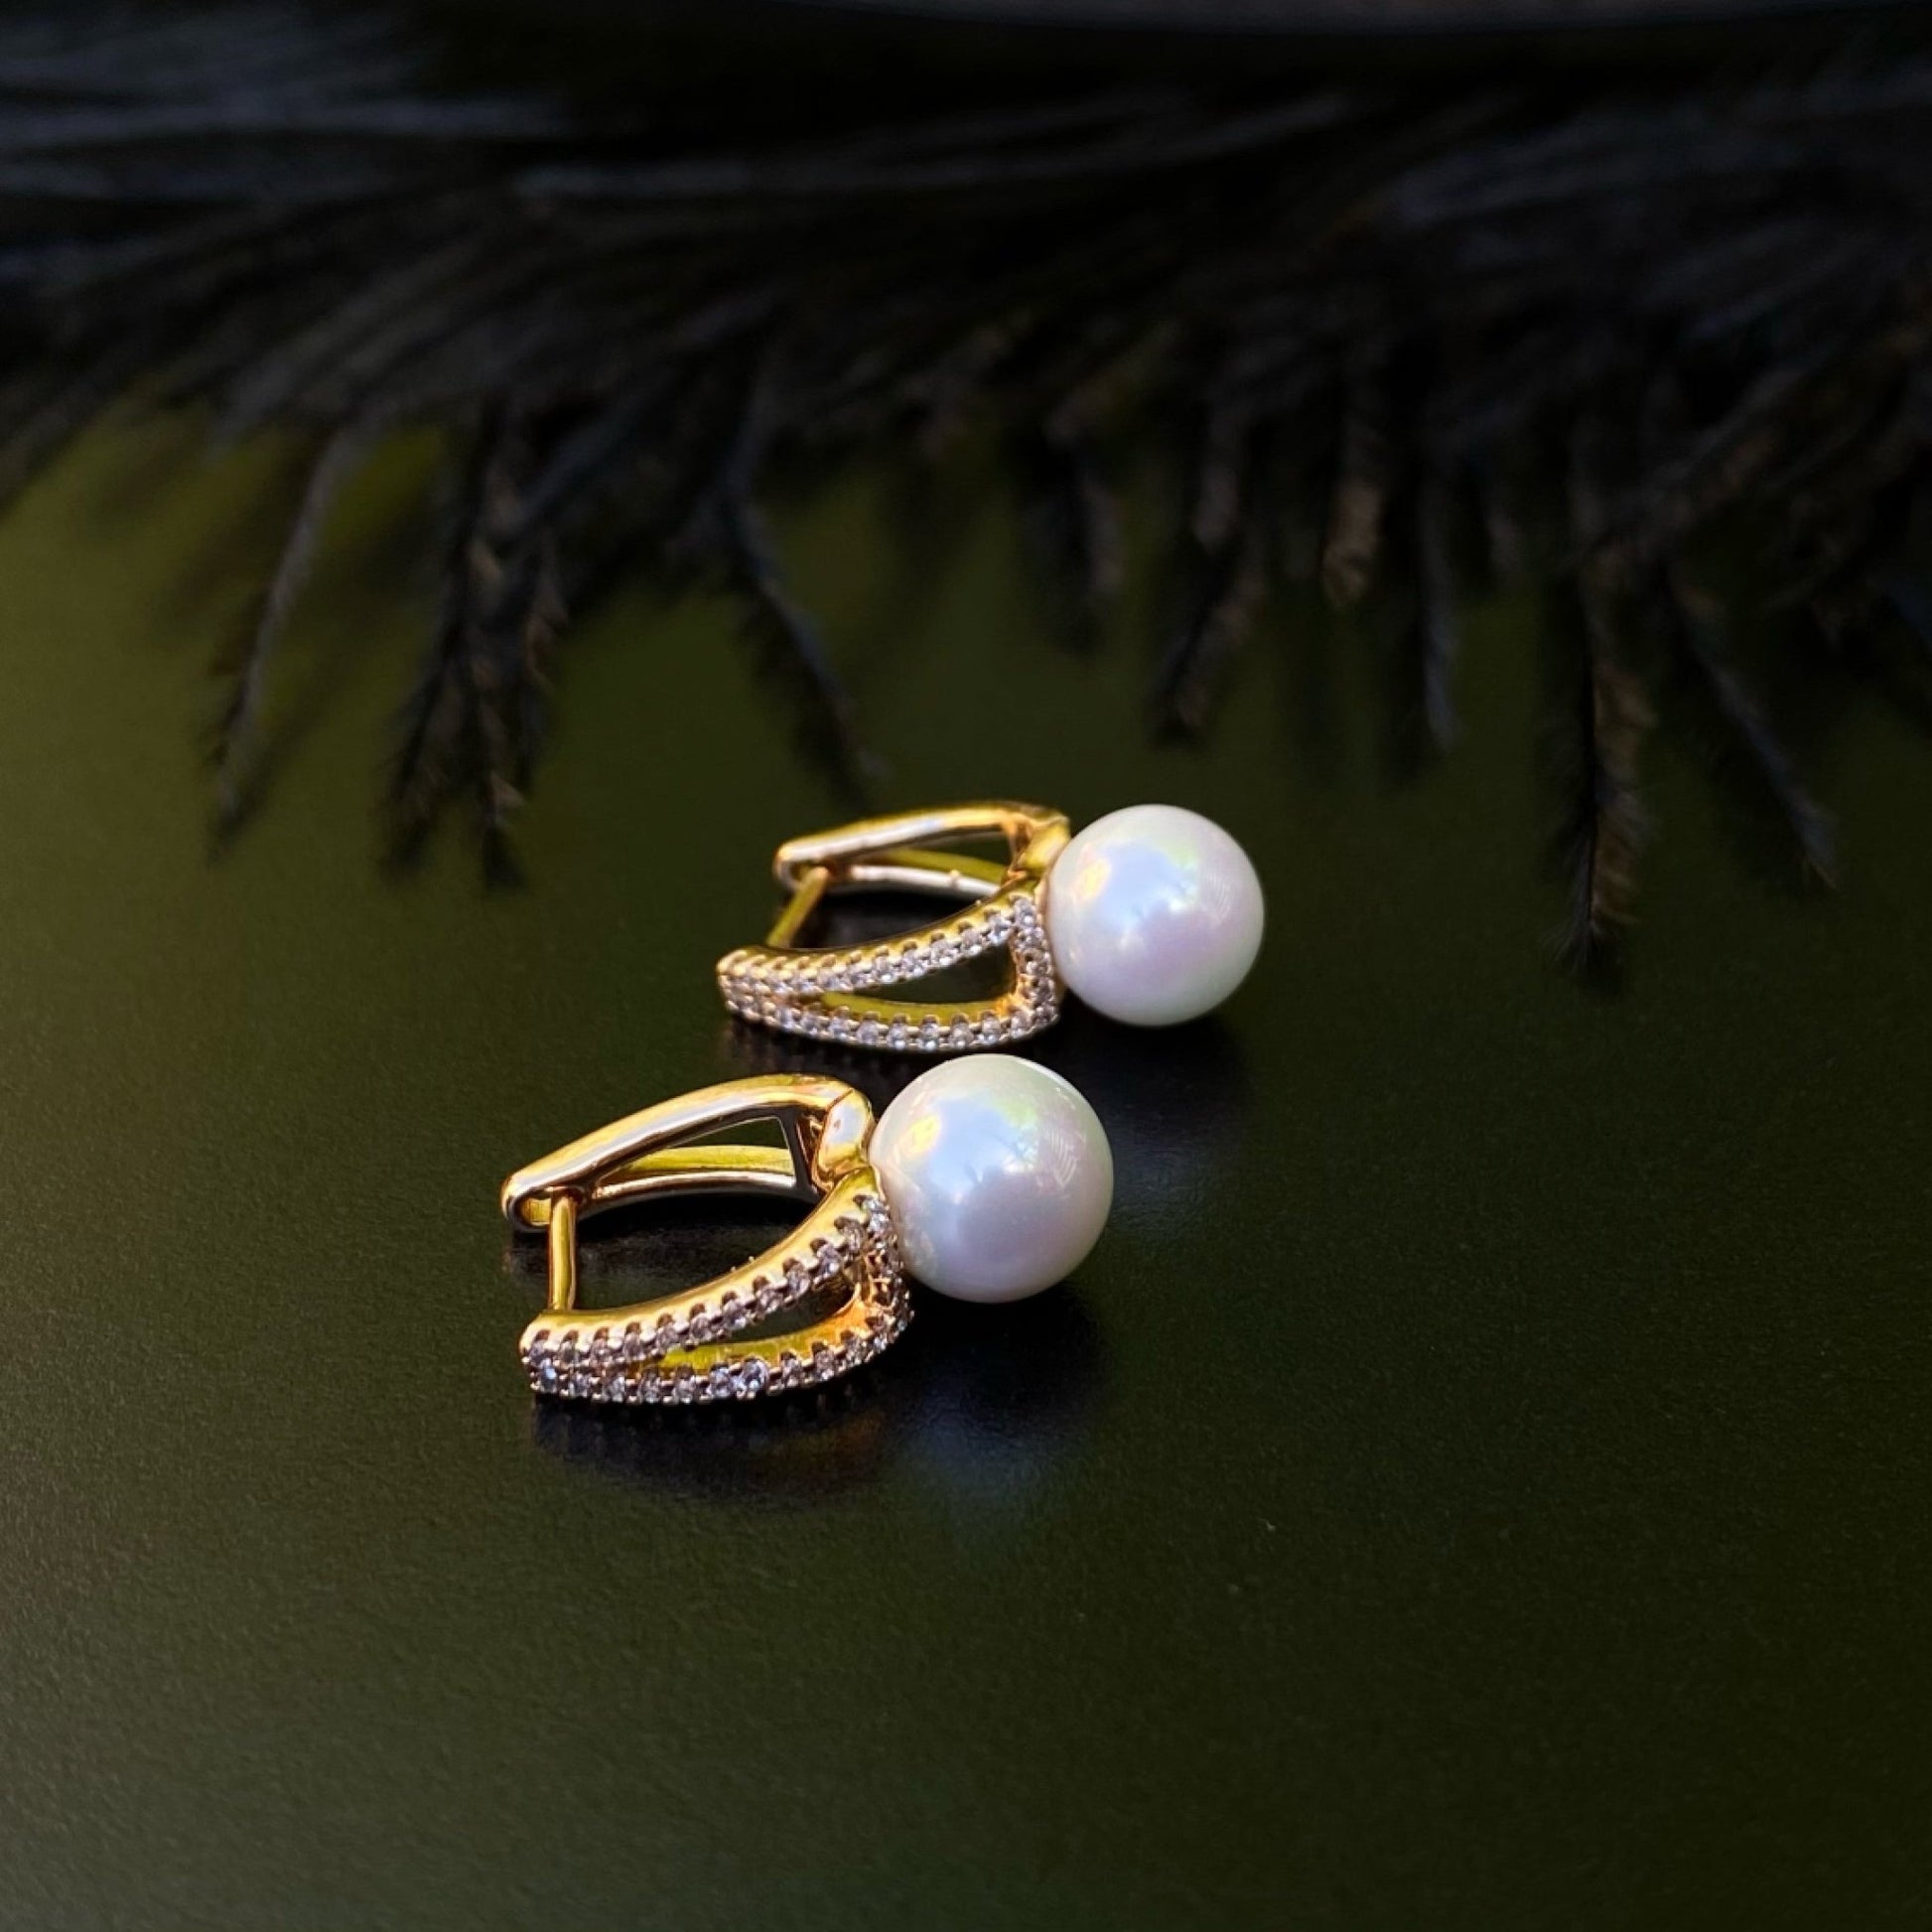 GOLD PLATED ENGLISH LOCK EARRINGS WITH PEARL -